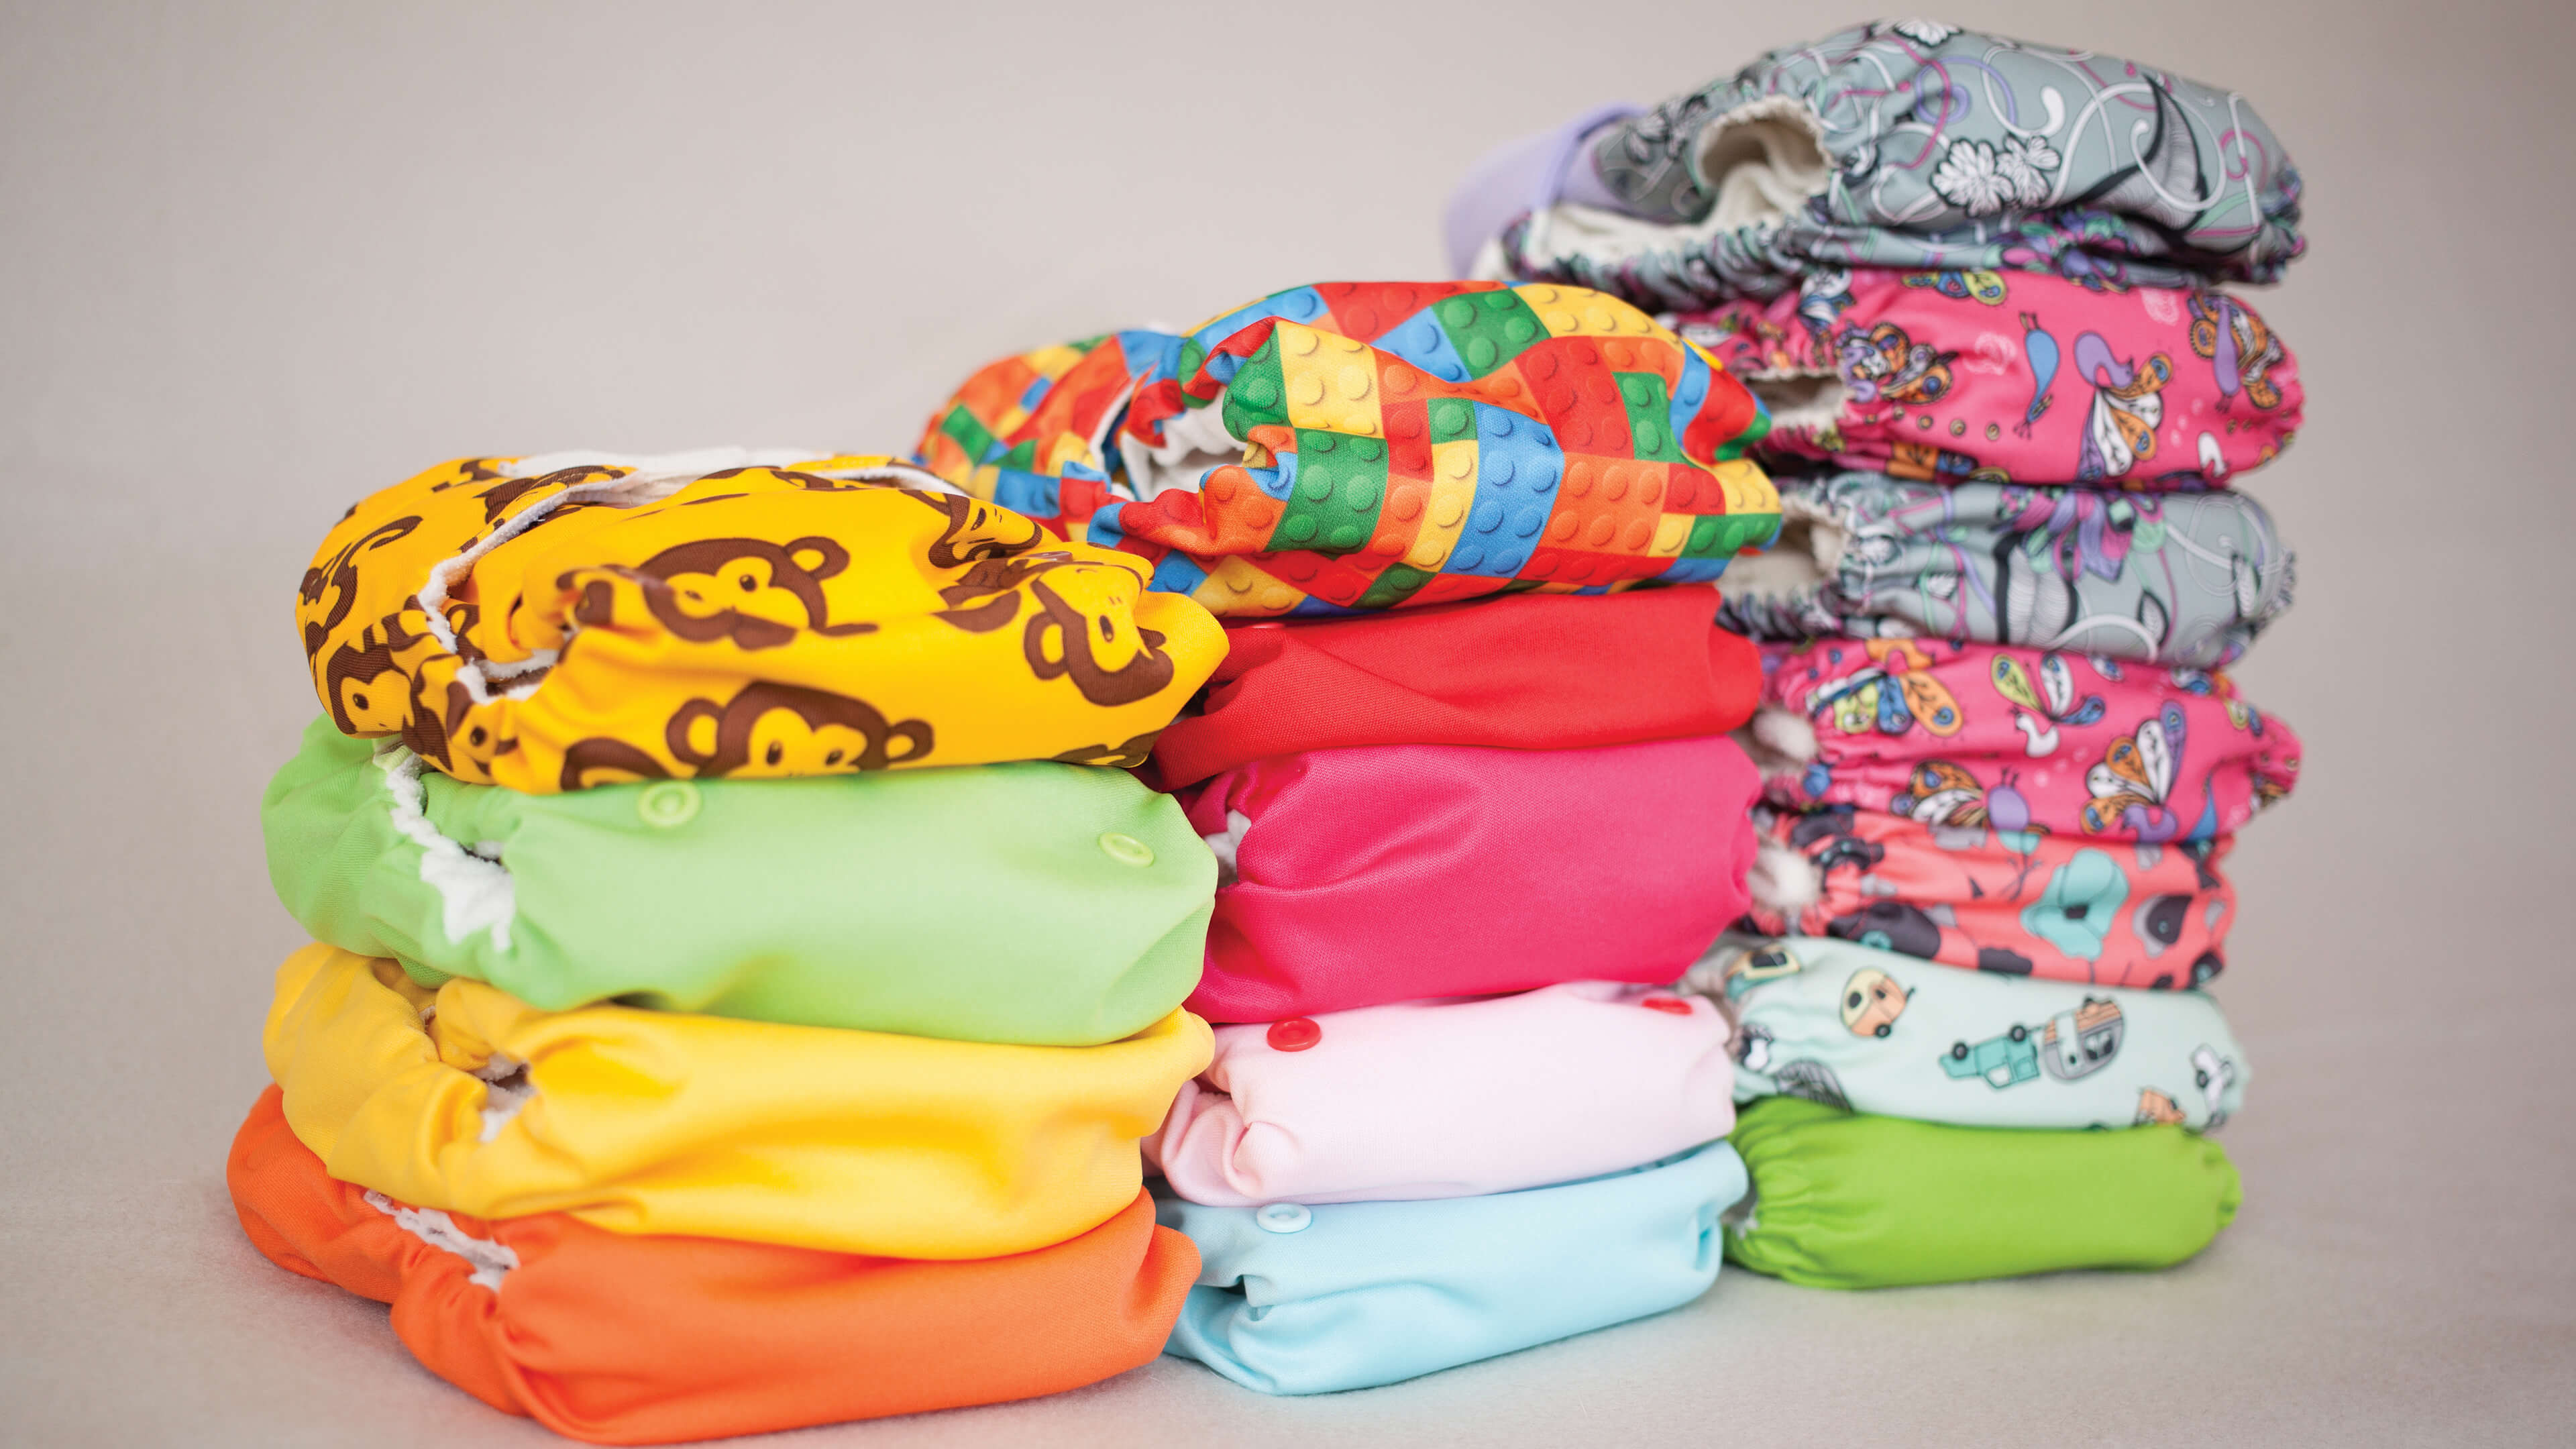 purchase cloth diapers